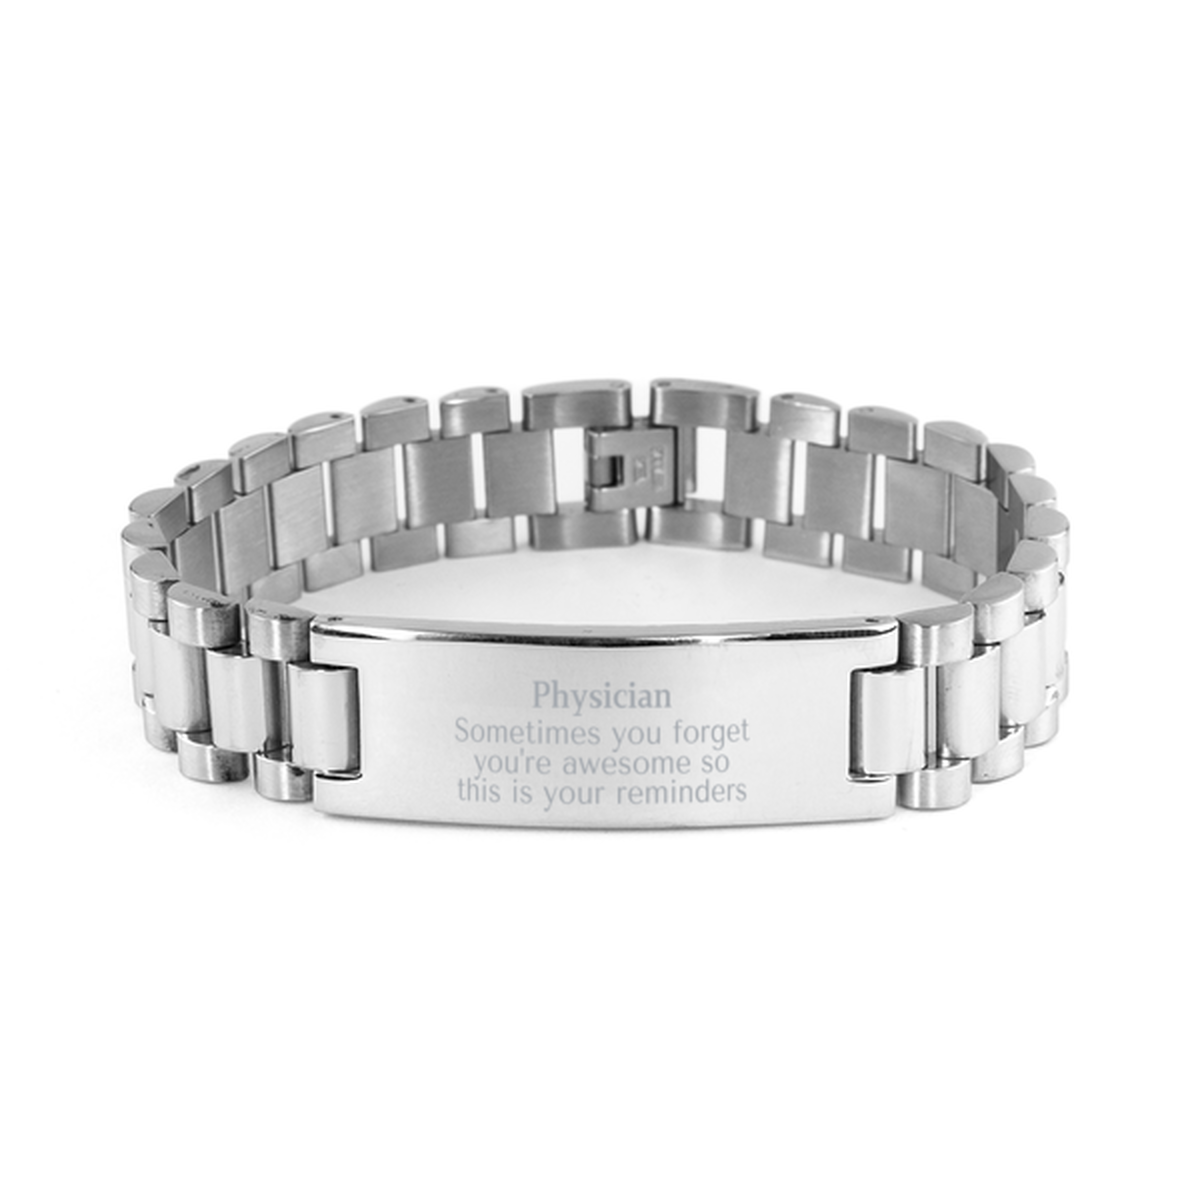 Sentimental Physician Ladder Stainless Steel Bracelet, Physician Sometimes you forget you're awesome so this is your reminders, Graduation Christmas Birthday Gifts for Physician, Men, Women, Coworkers